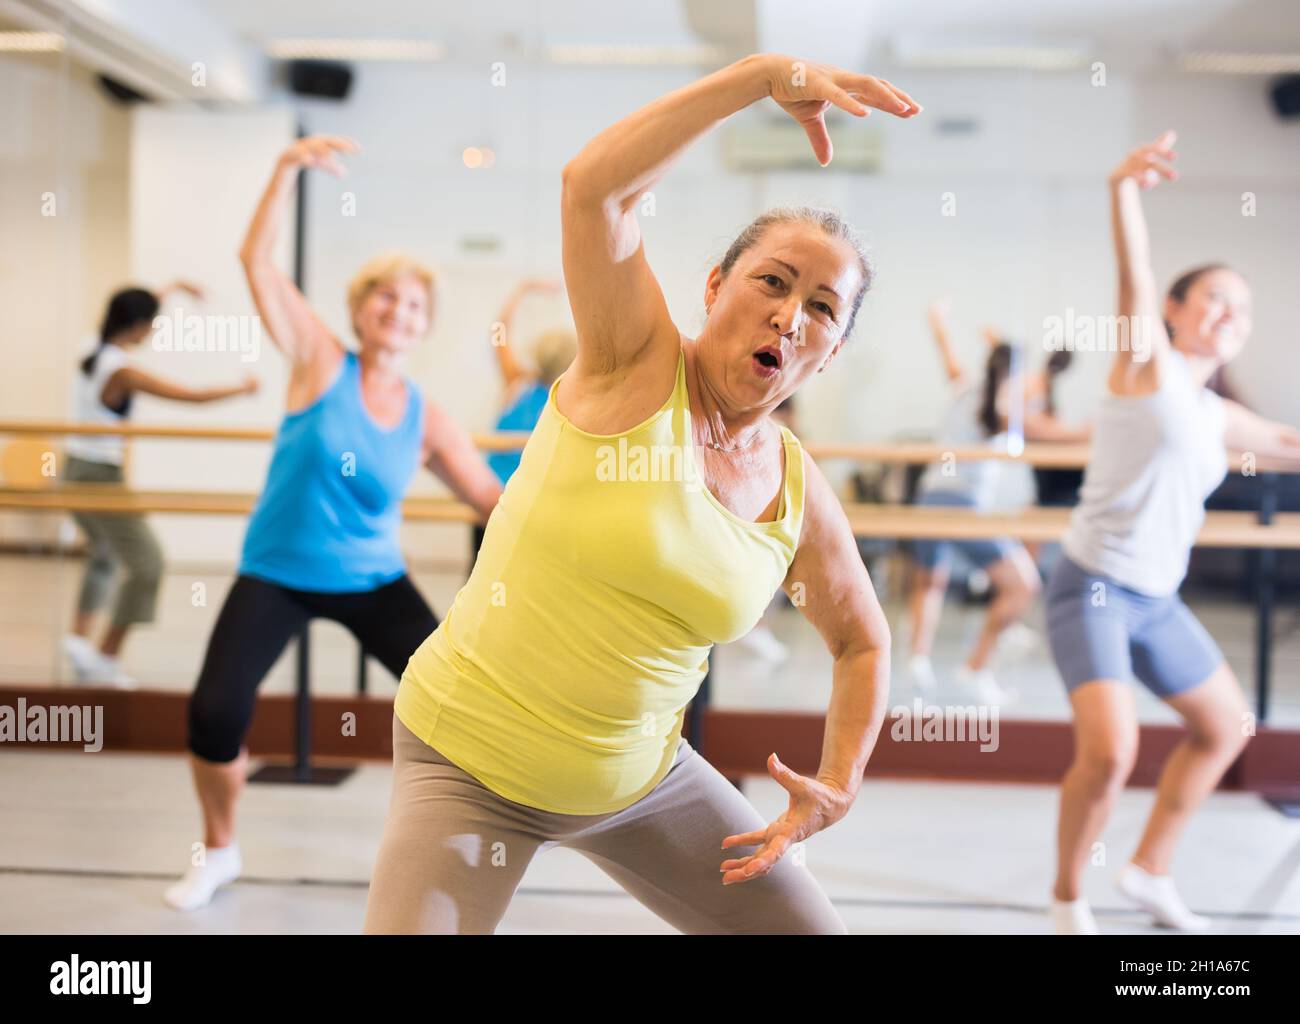 Old lady dancing in studio with women Stock Photo